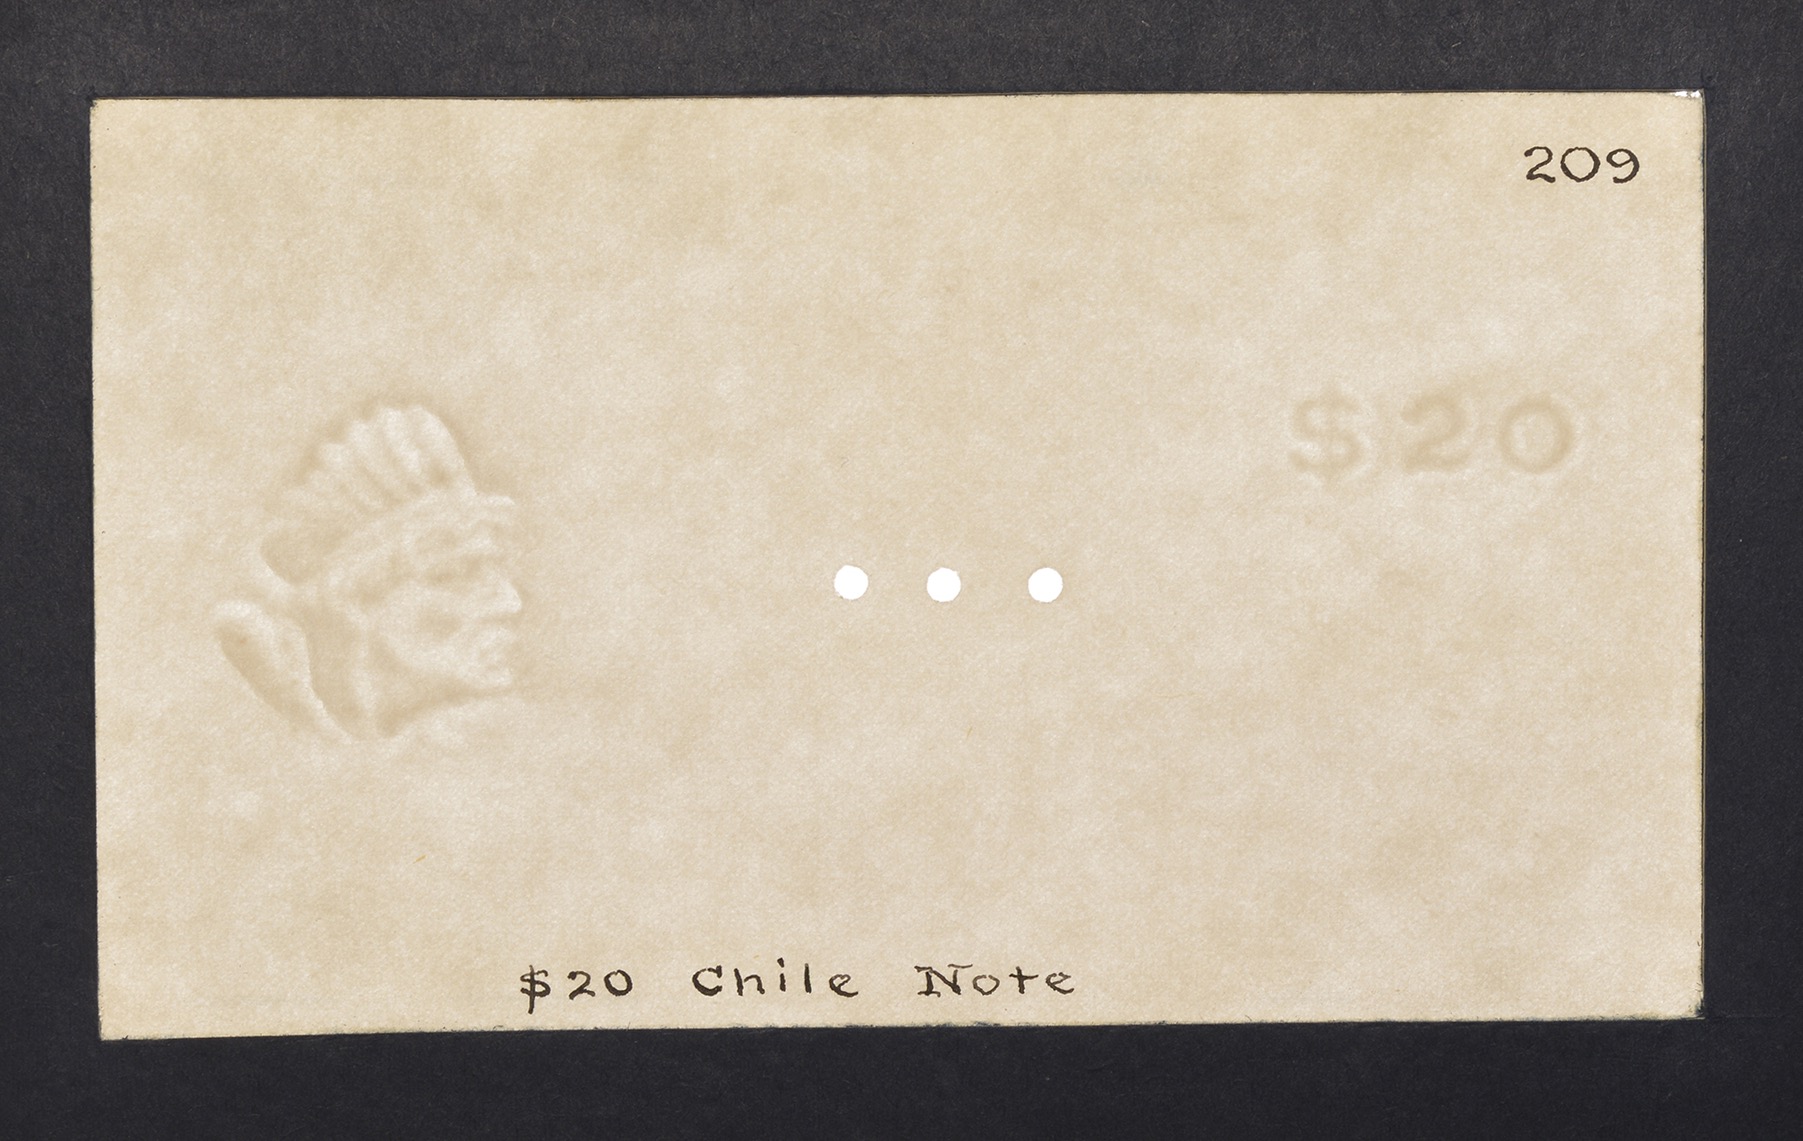 Banco Central de Chile, watermarked paper for the 5, 10 (3) and 20 Pesos (2), issue of... - Image 6 of 6